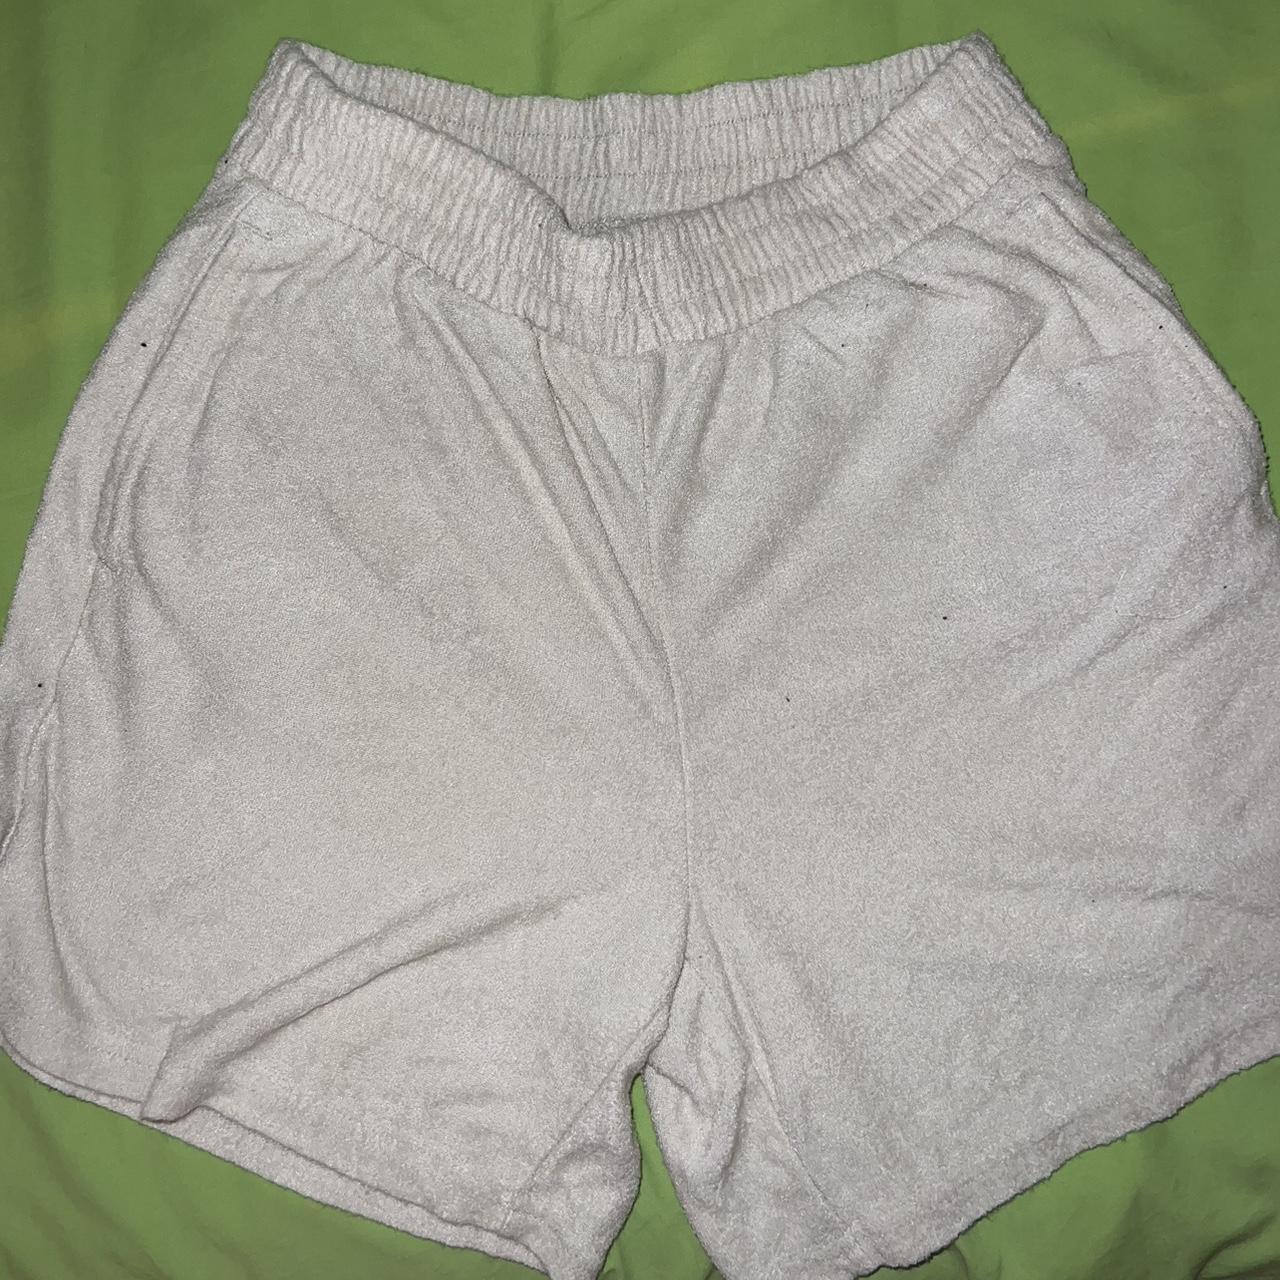 Xs booty shorts, never have been worn. Cute style - Depop